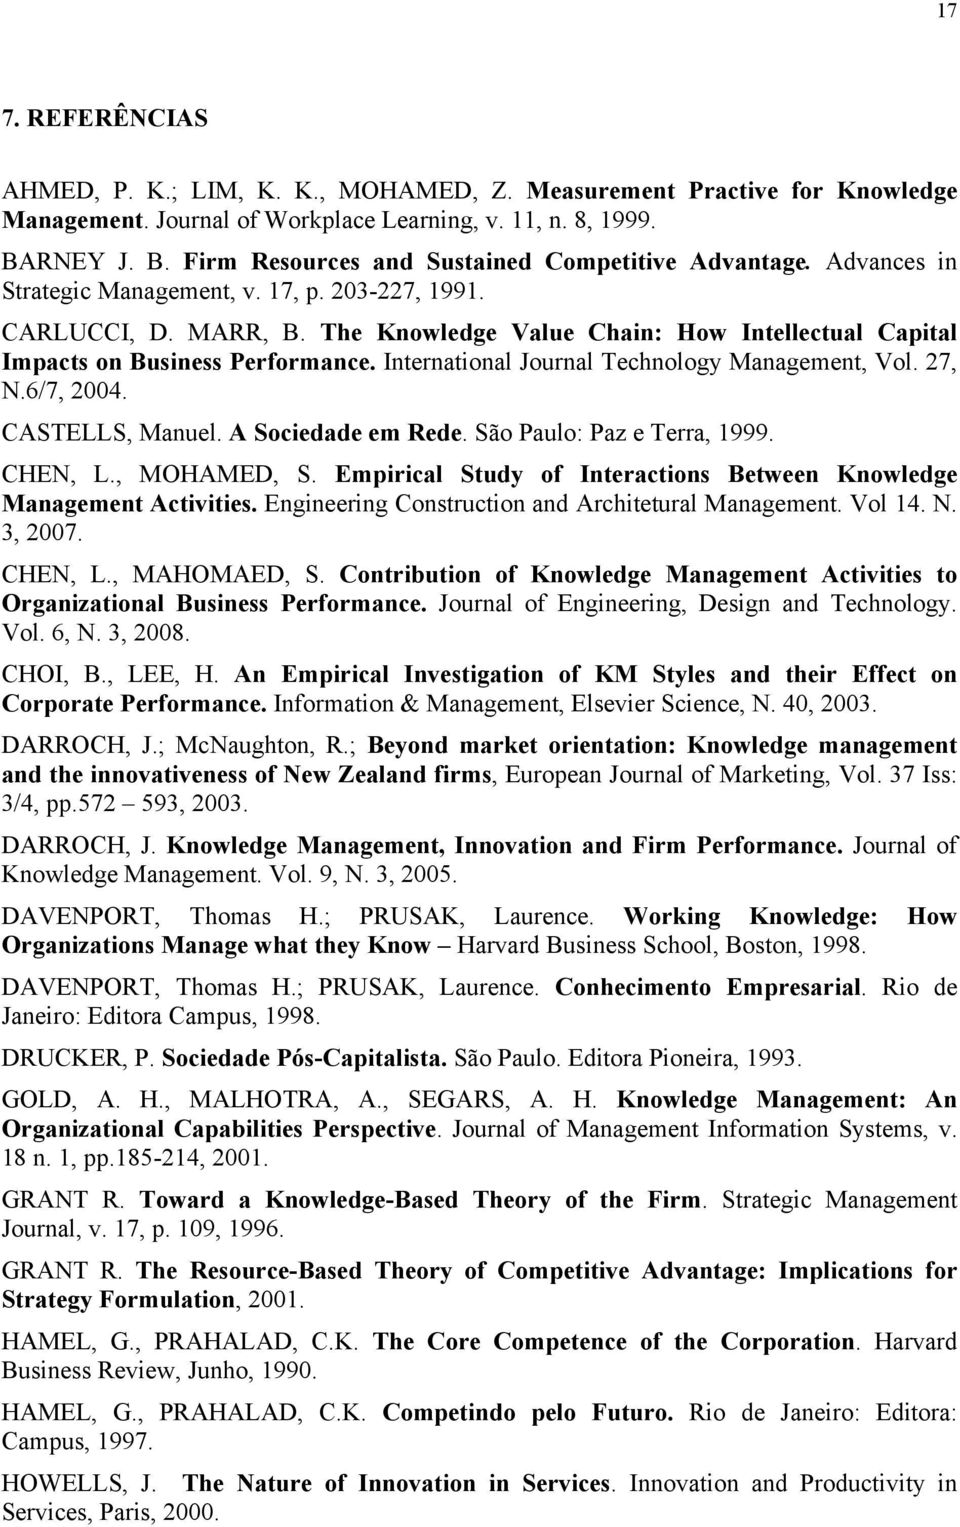 The Knowledge Value Chain: How Intellectual Capital Impacts on Business Performance. International Journal Technology Management, Vol. 27, N.6/7, 2004. CASTELLS, Manuel. A Sociedade em Rede.